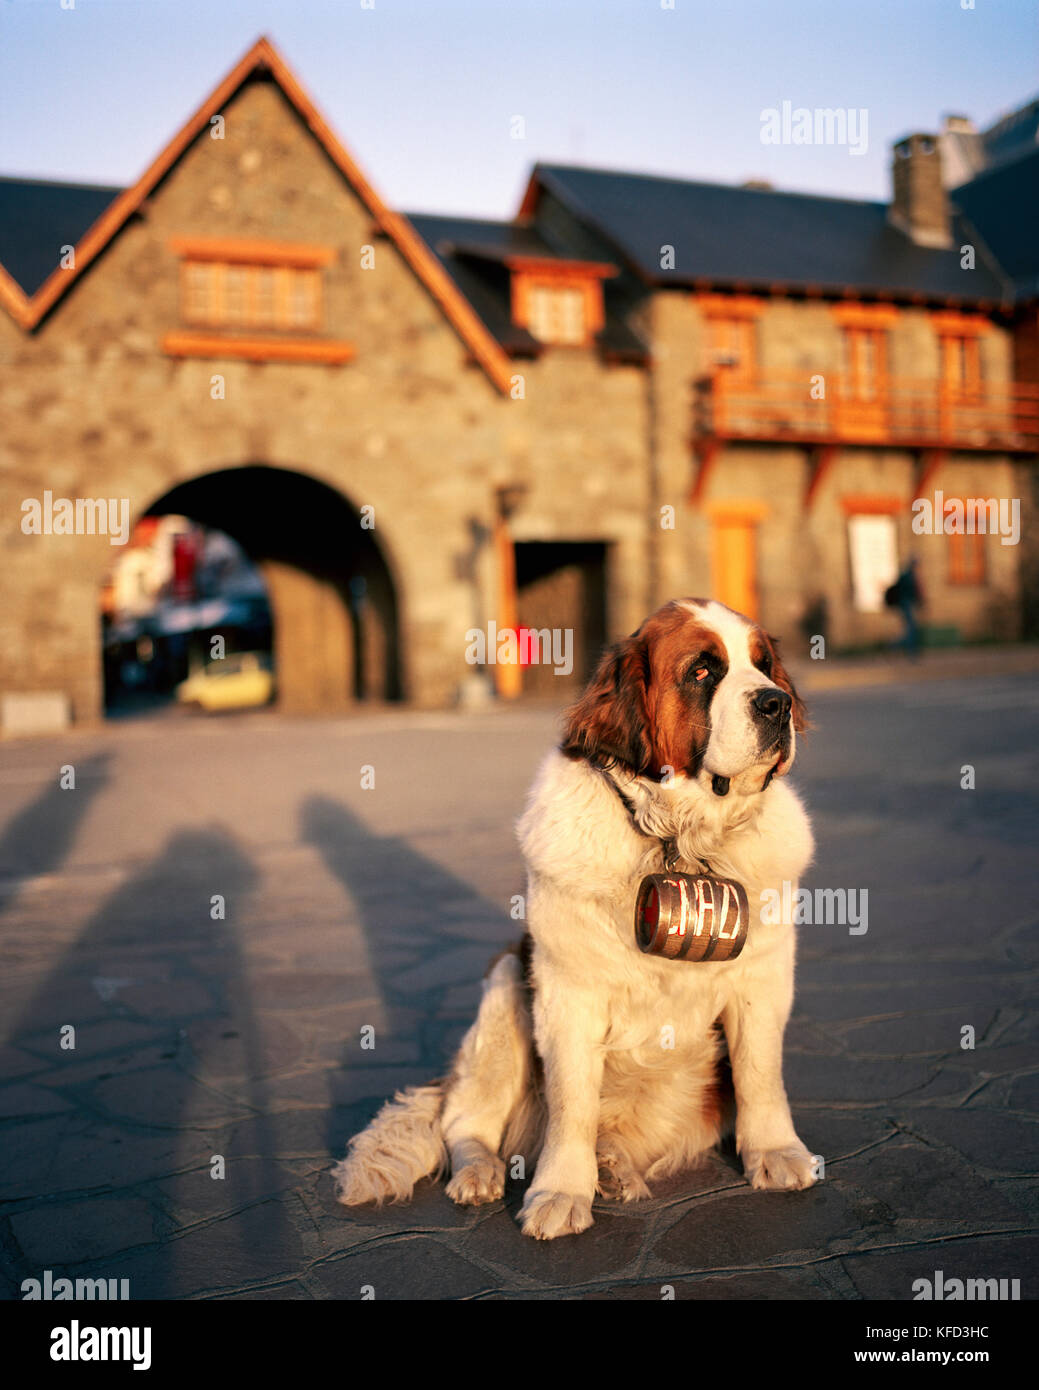 L'Argentine, Bariloche, close-up of dog sitting on street Banque D'Images